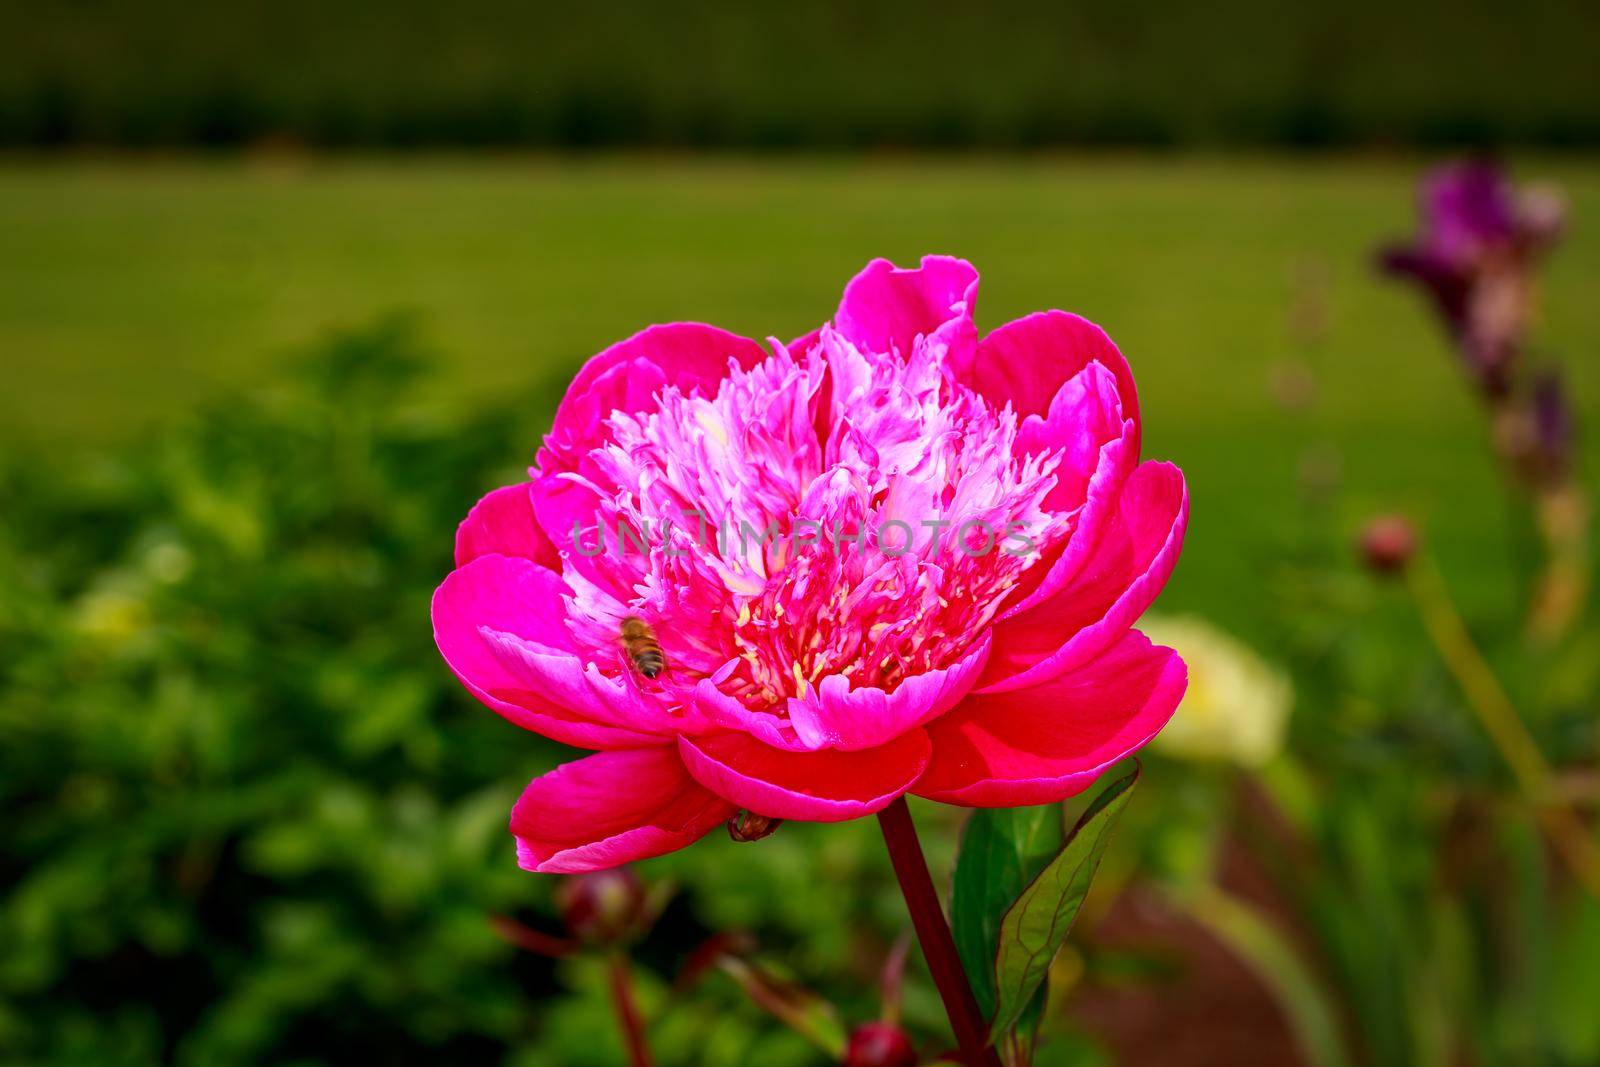 Beautiful Peony in Full Blossom by gepeng